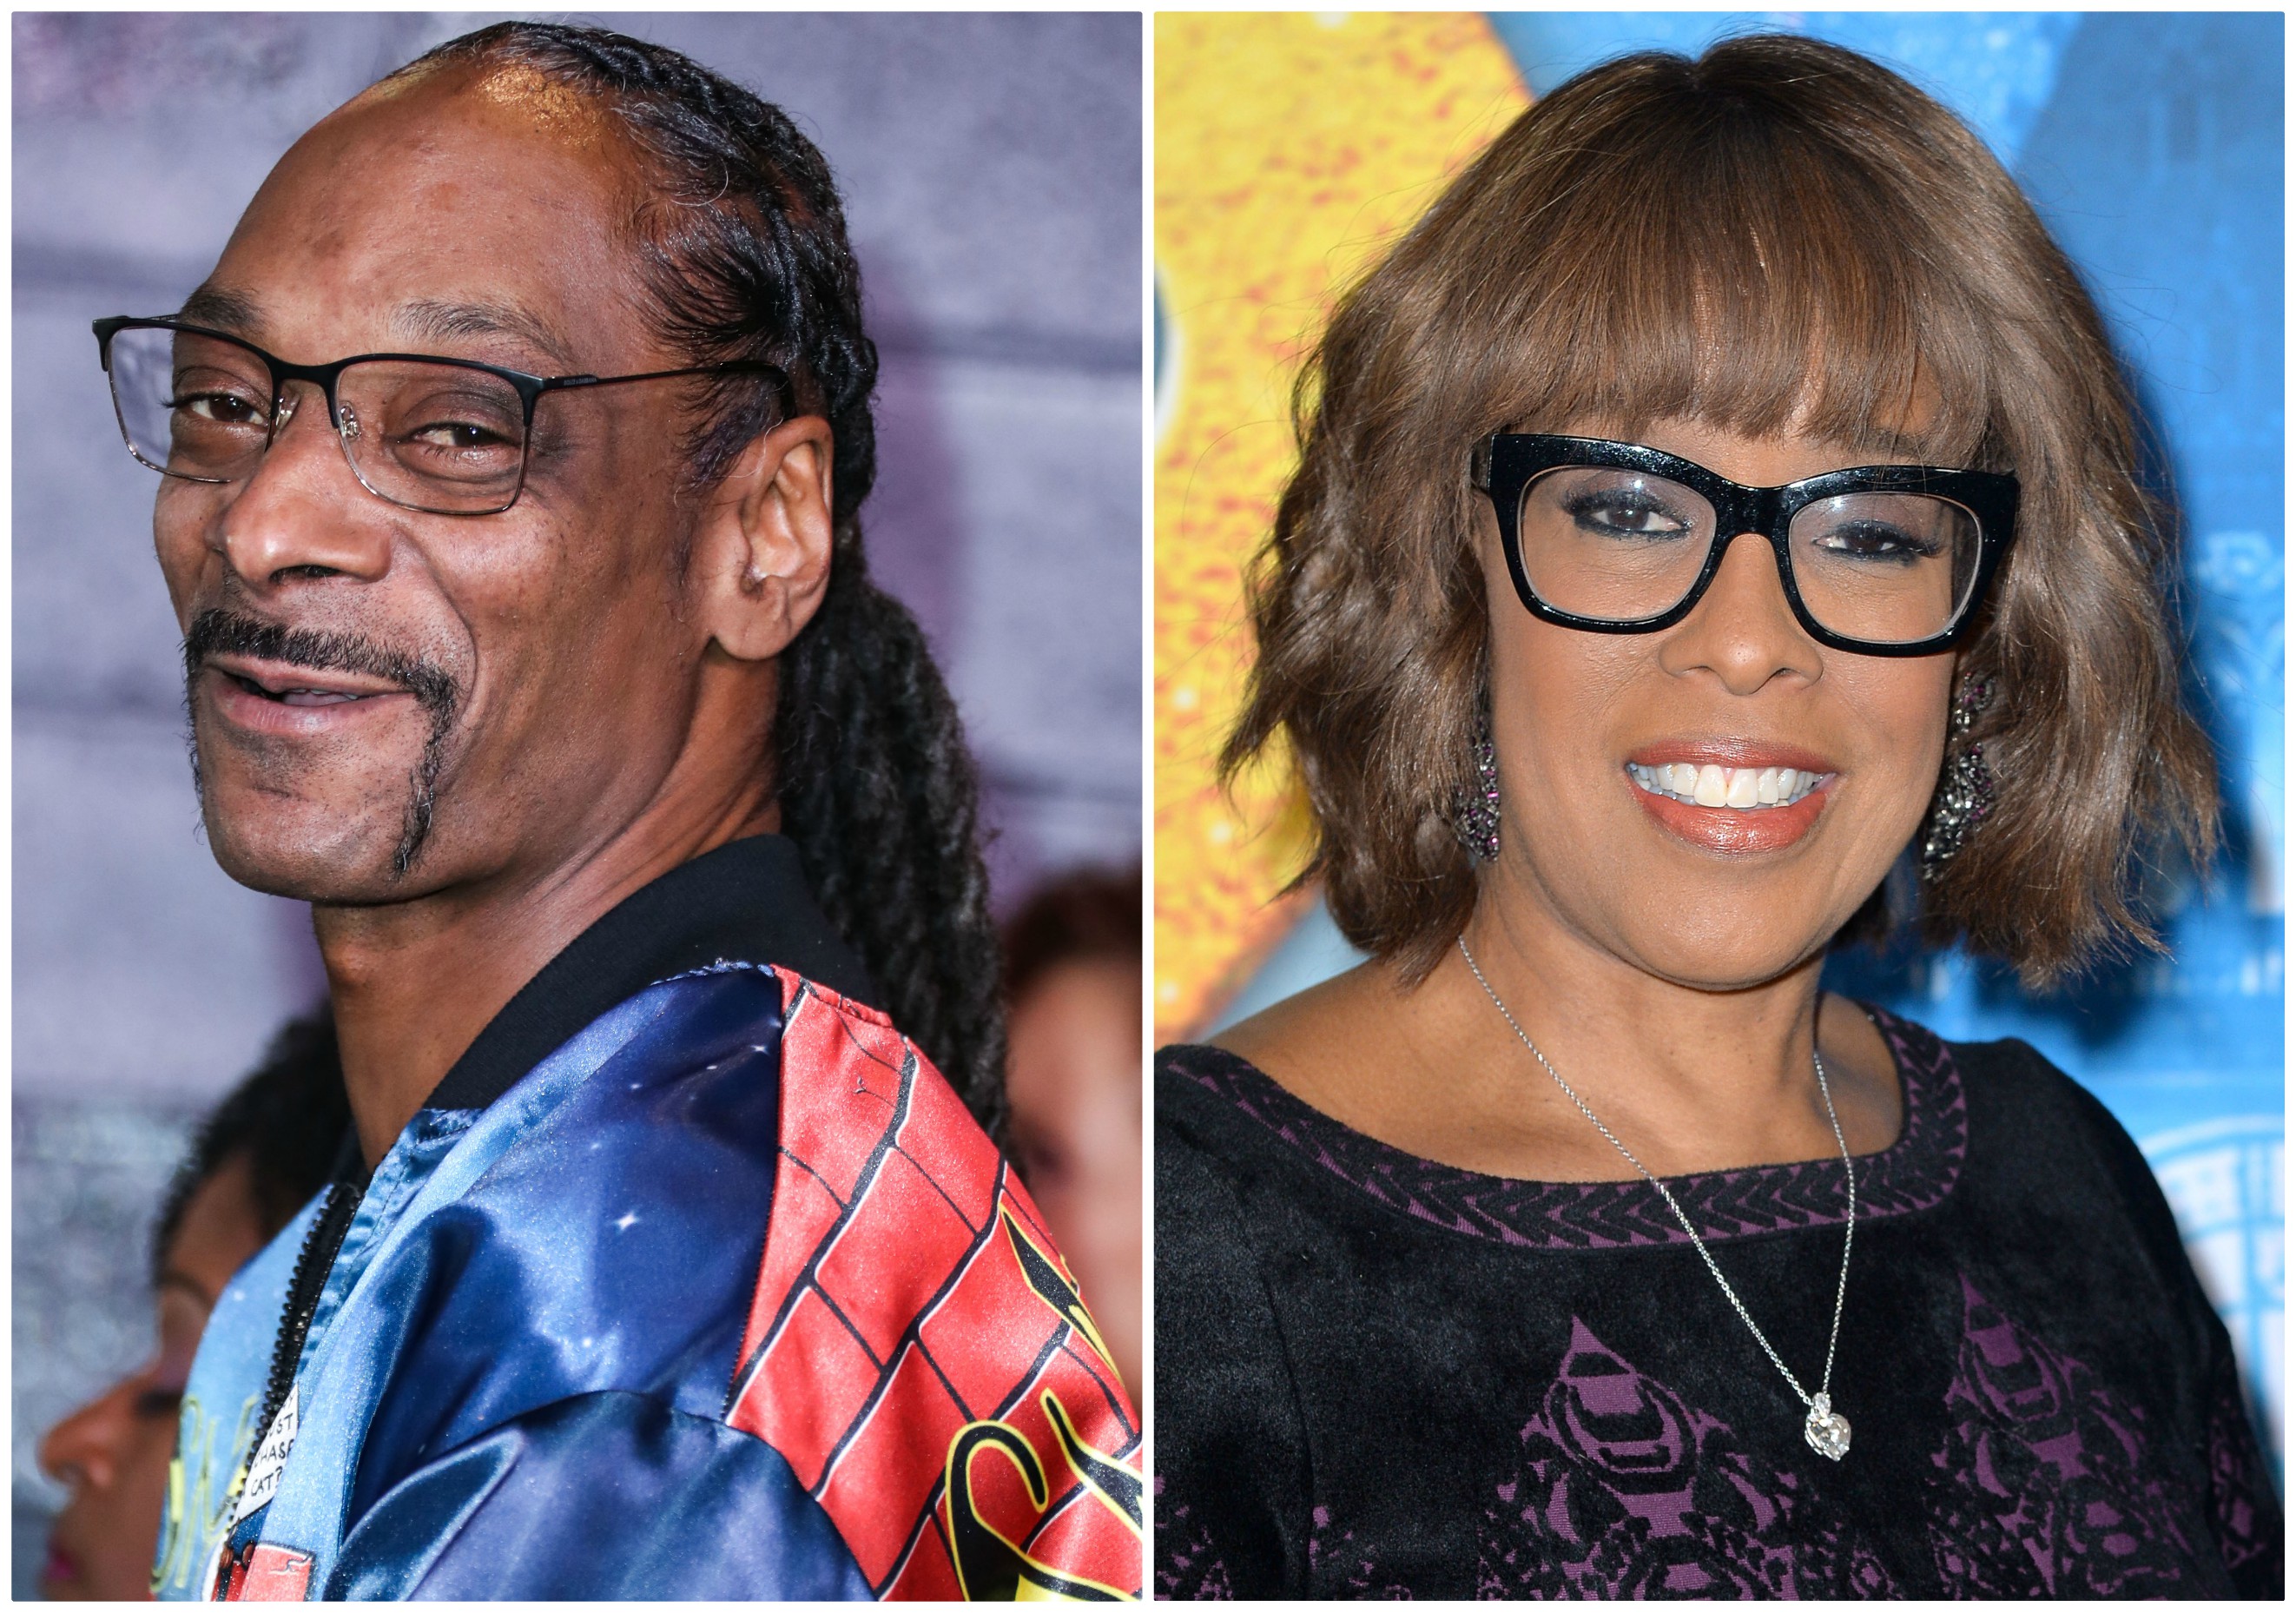 Snoop Dogg and Gayle King